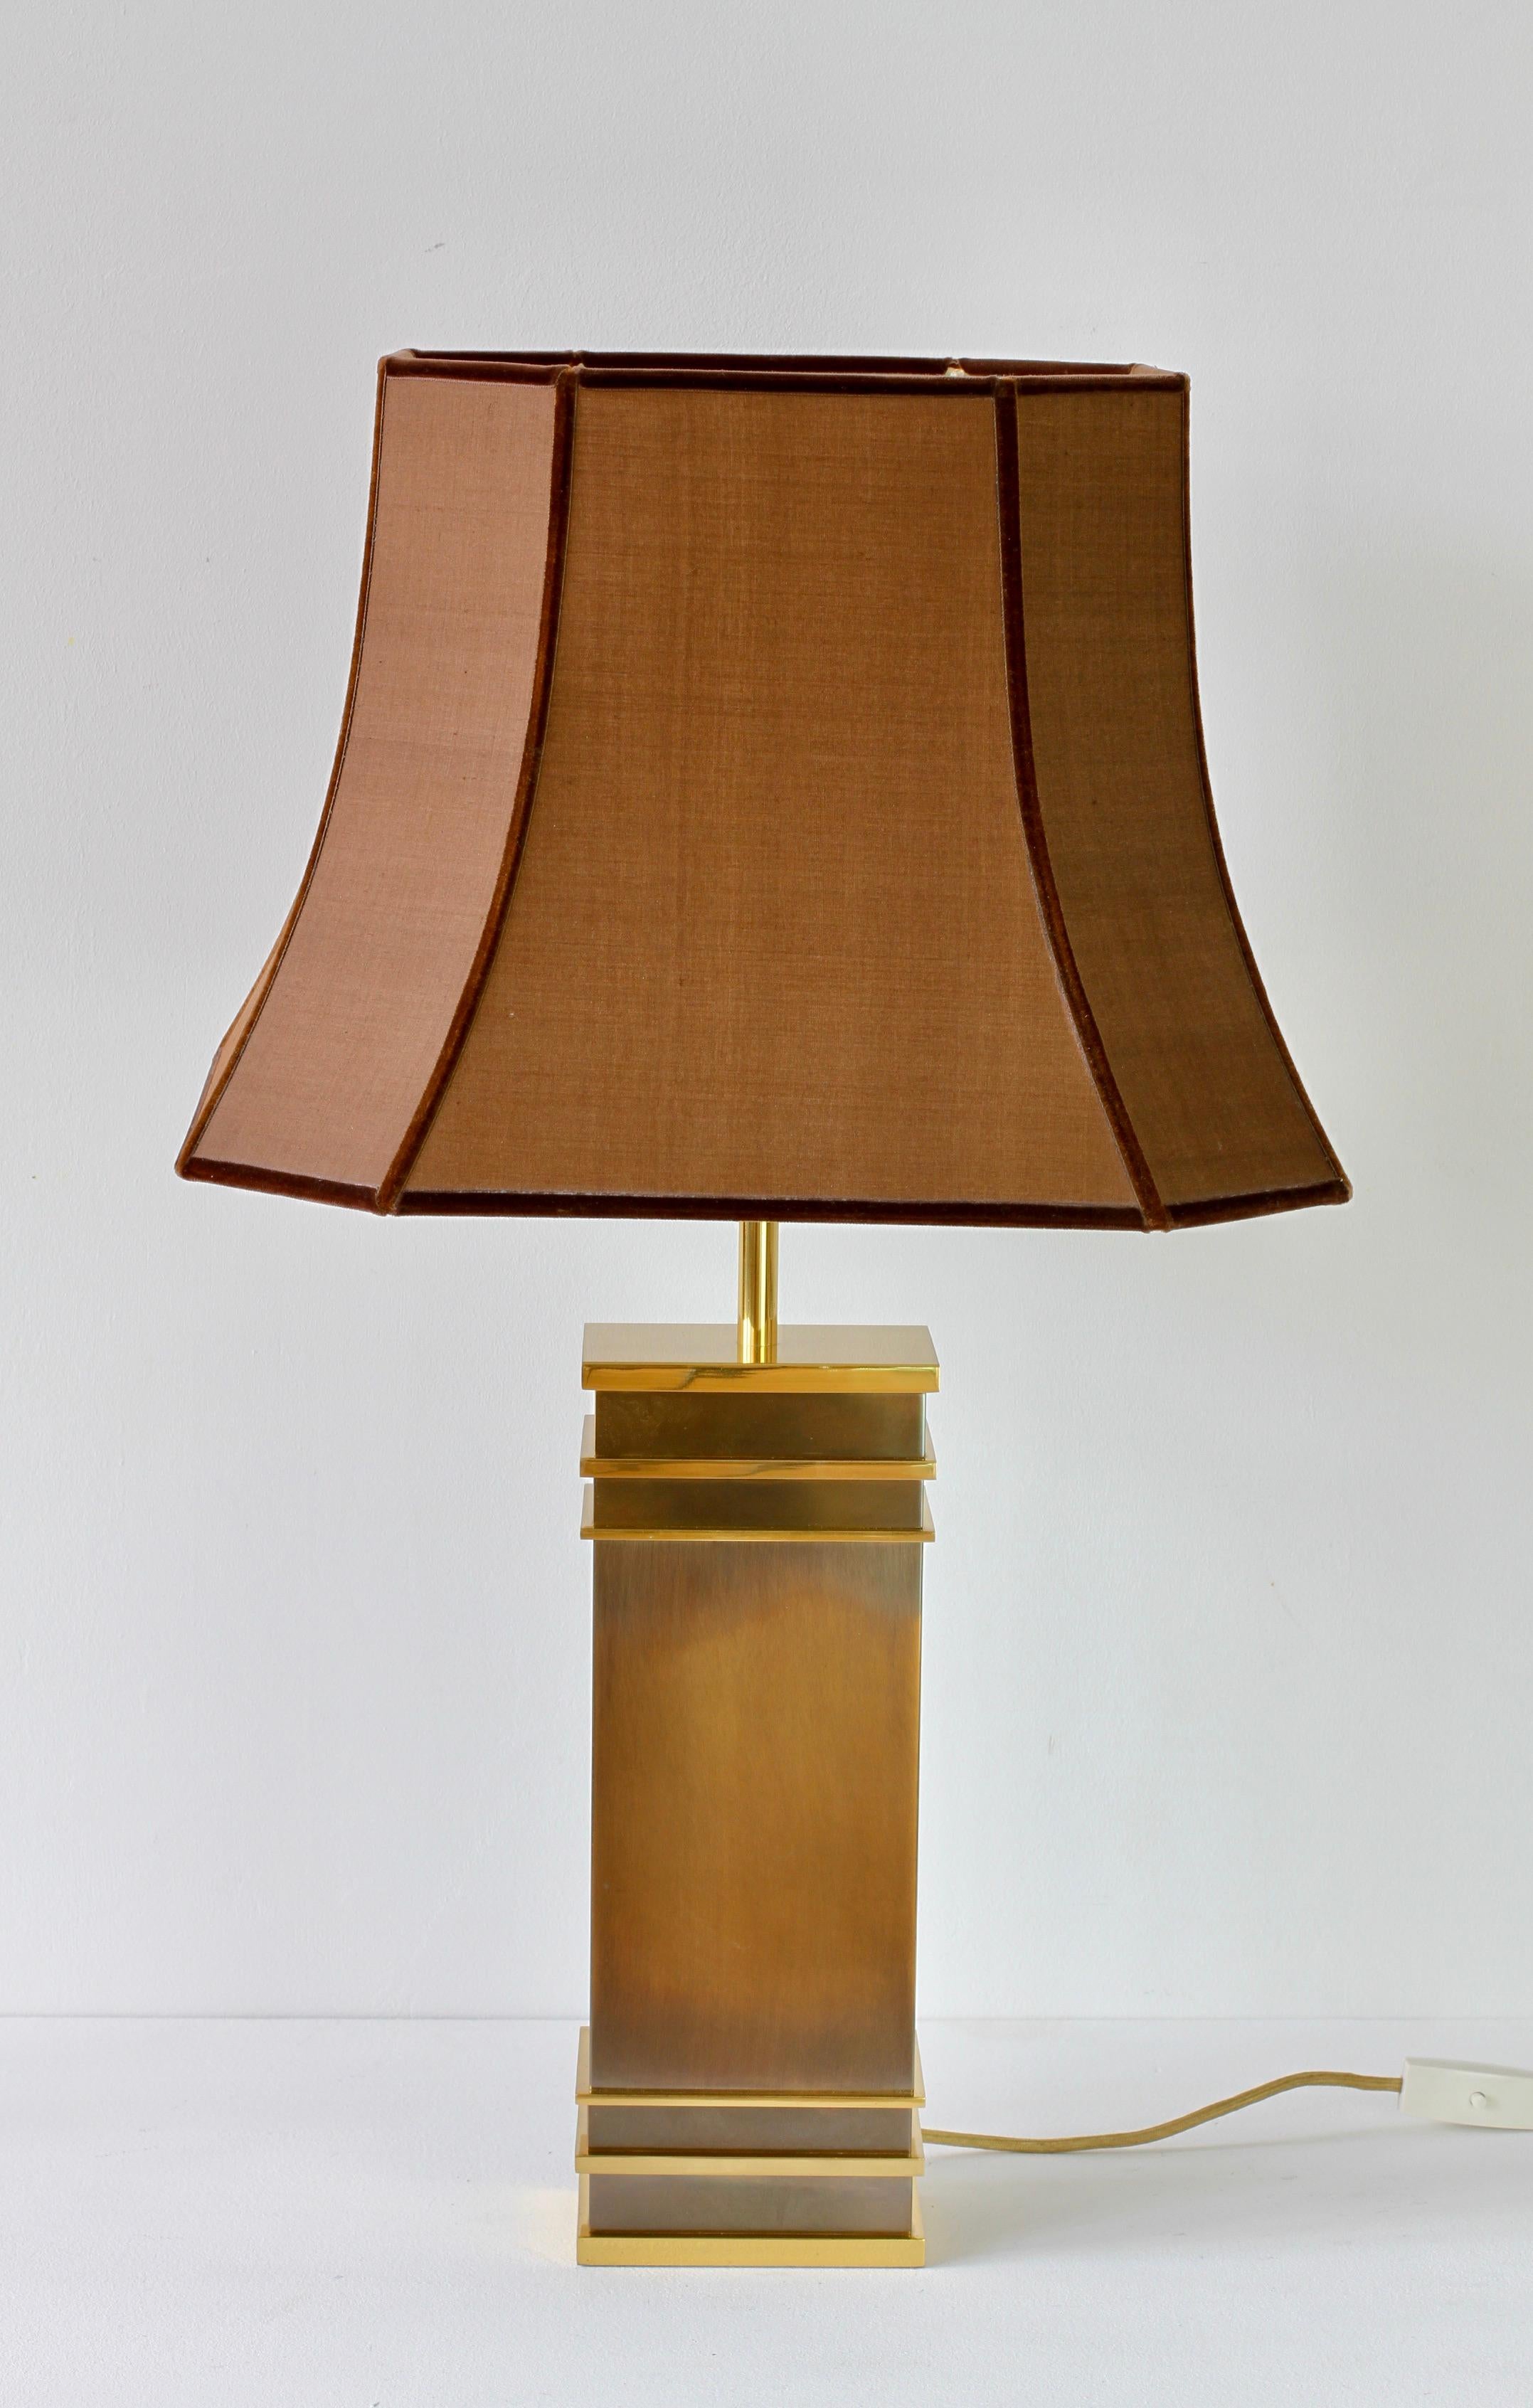 Rare, large and heavy quality Vereinigte Werkstätten (United Workshops / Ateliers) table lamp in polished brass and patinated brushed bronze metal, made in Germany circa 1970s / beginning of the 1980s. This vintage midcentury design would fit within